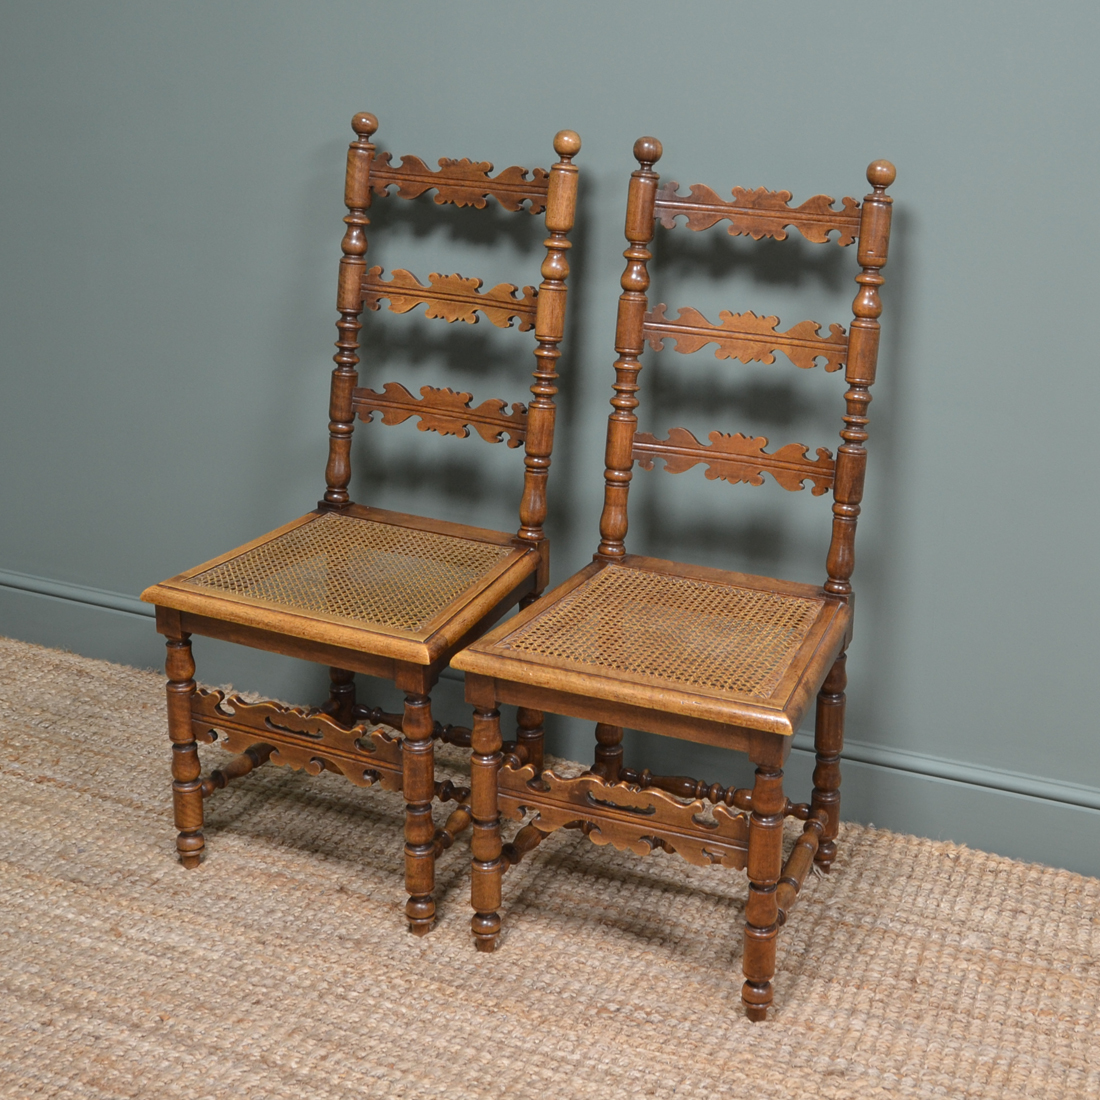 Pair of Fruitwood Antique Ladder Back Chairs - Image 7 of 8